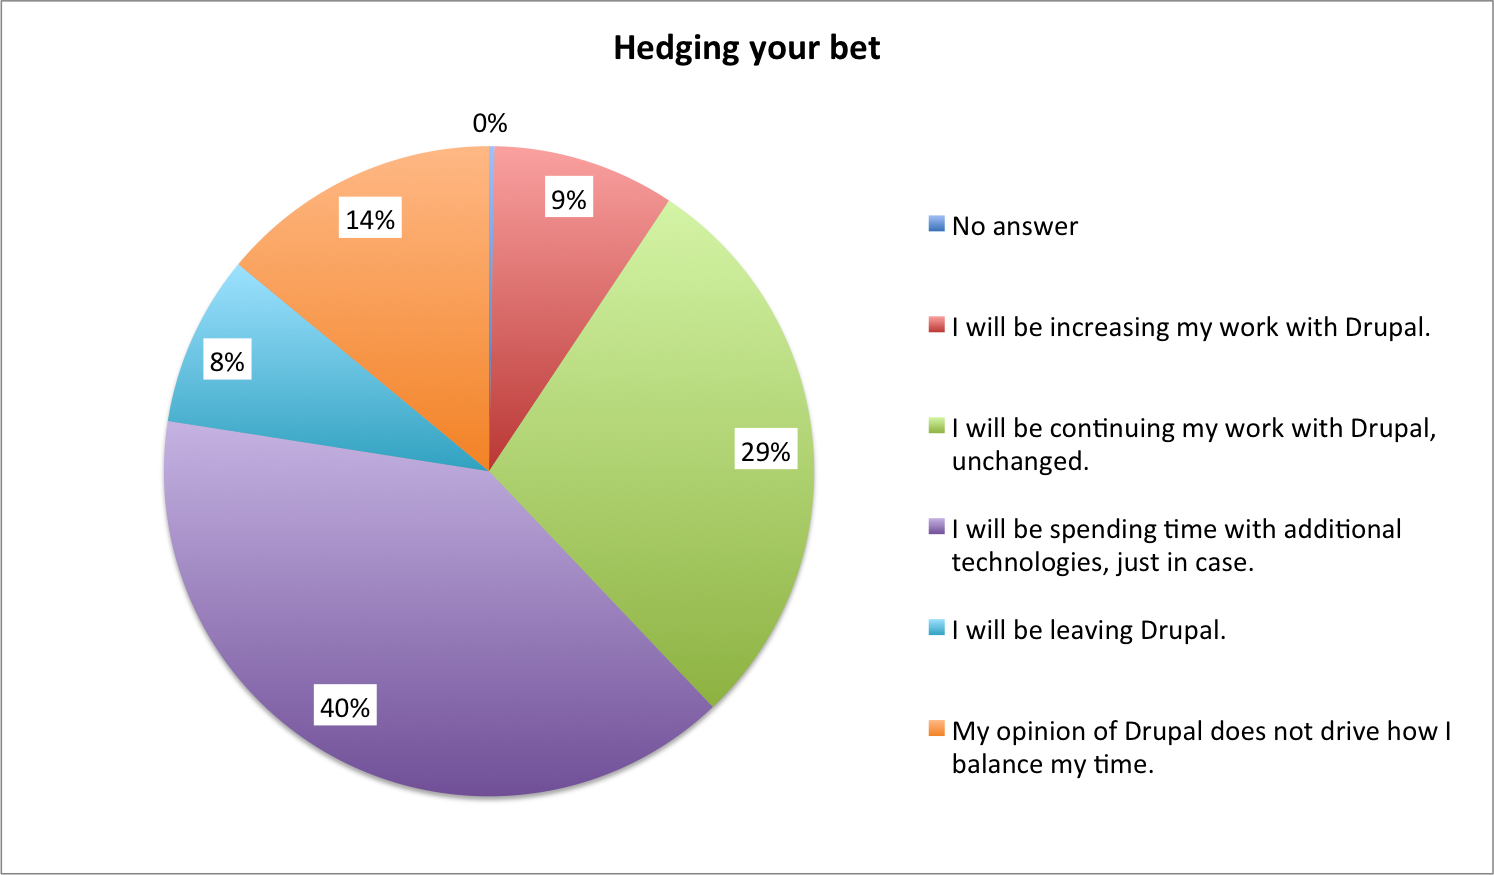  Hedging your Bet